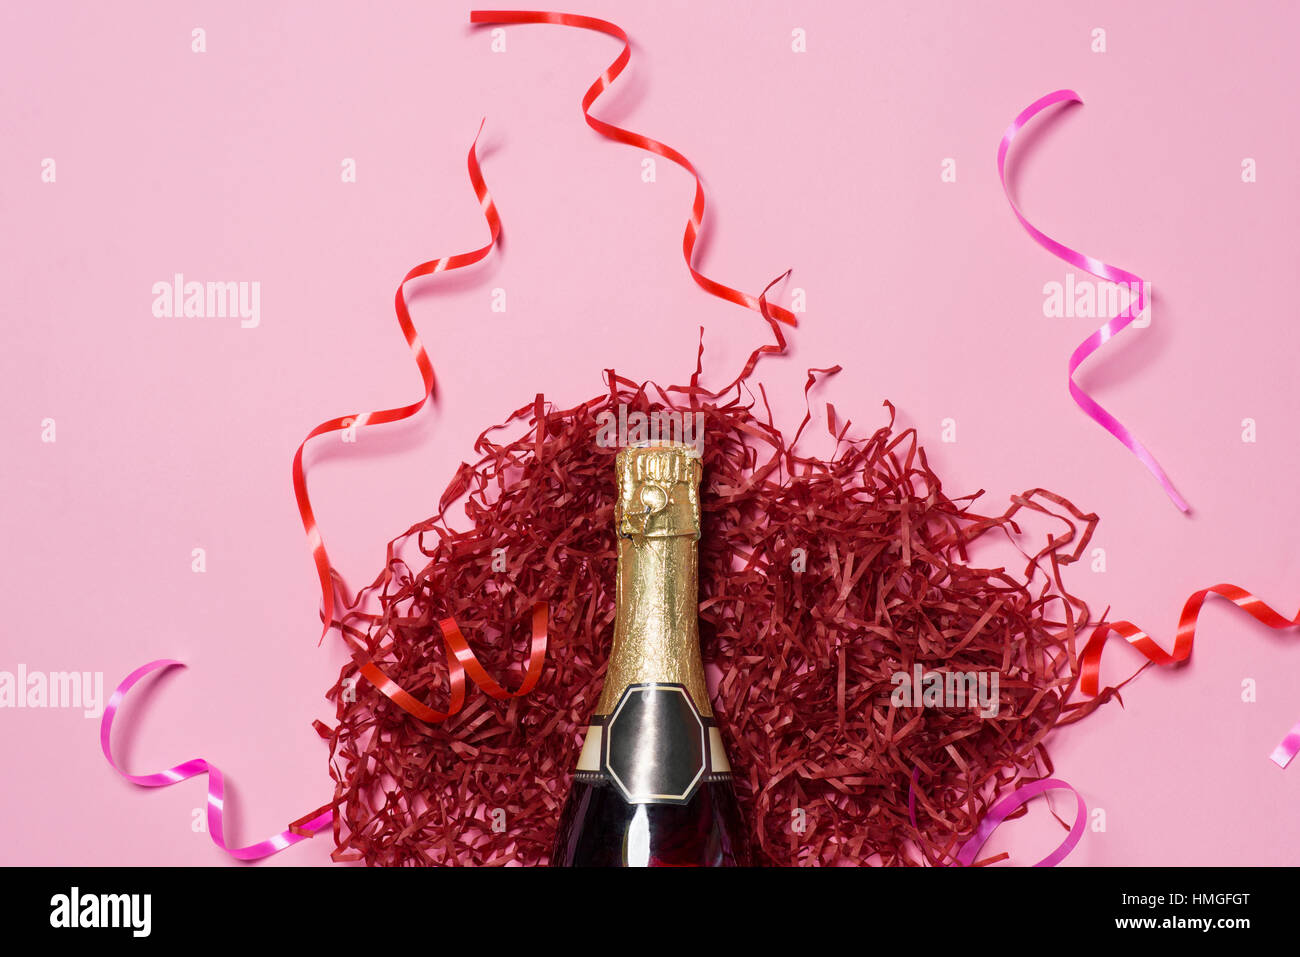 Flat lay of Celebration. Champagne bottle with colorful party streamers on pink background. Stock Photo